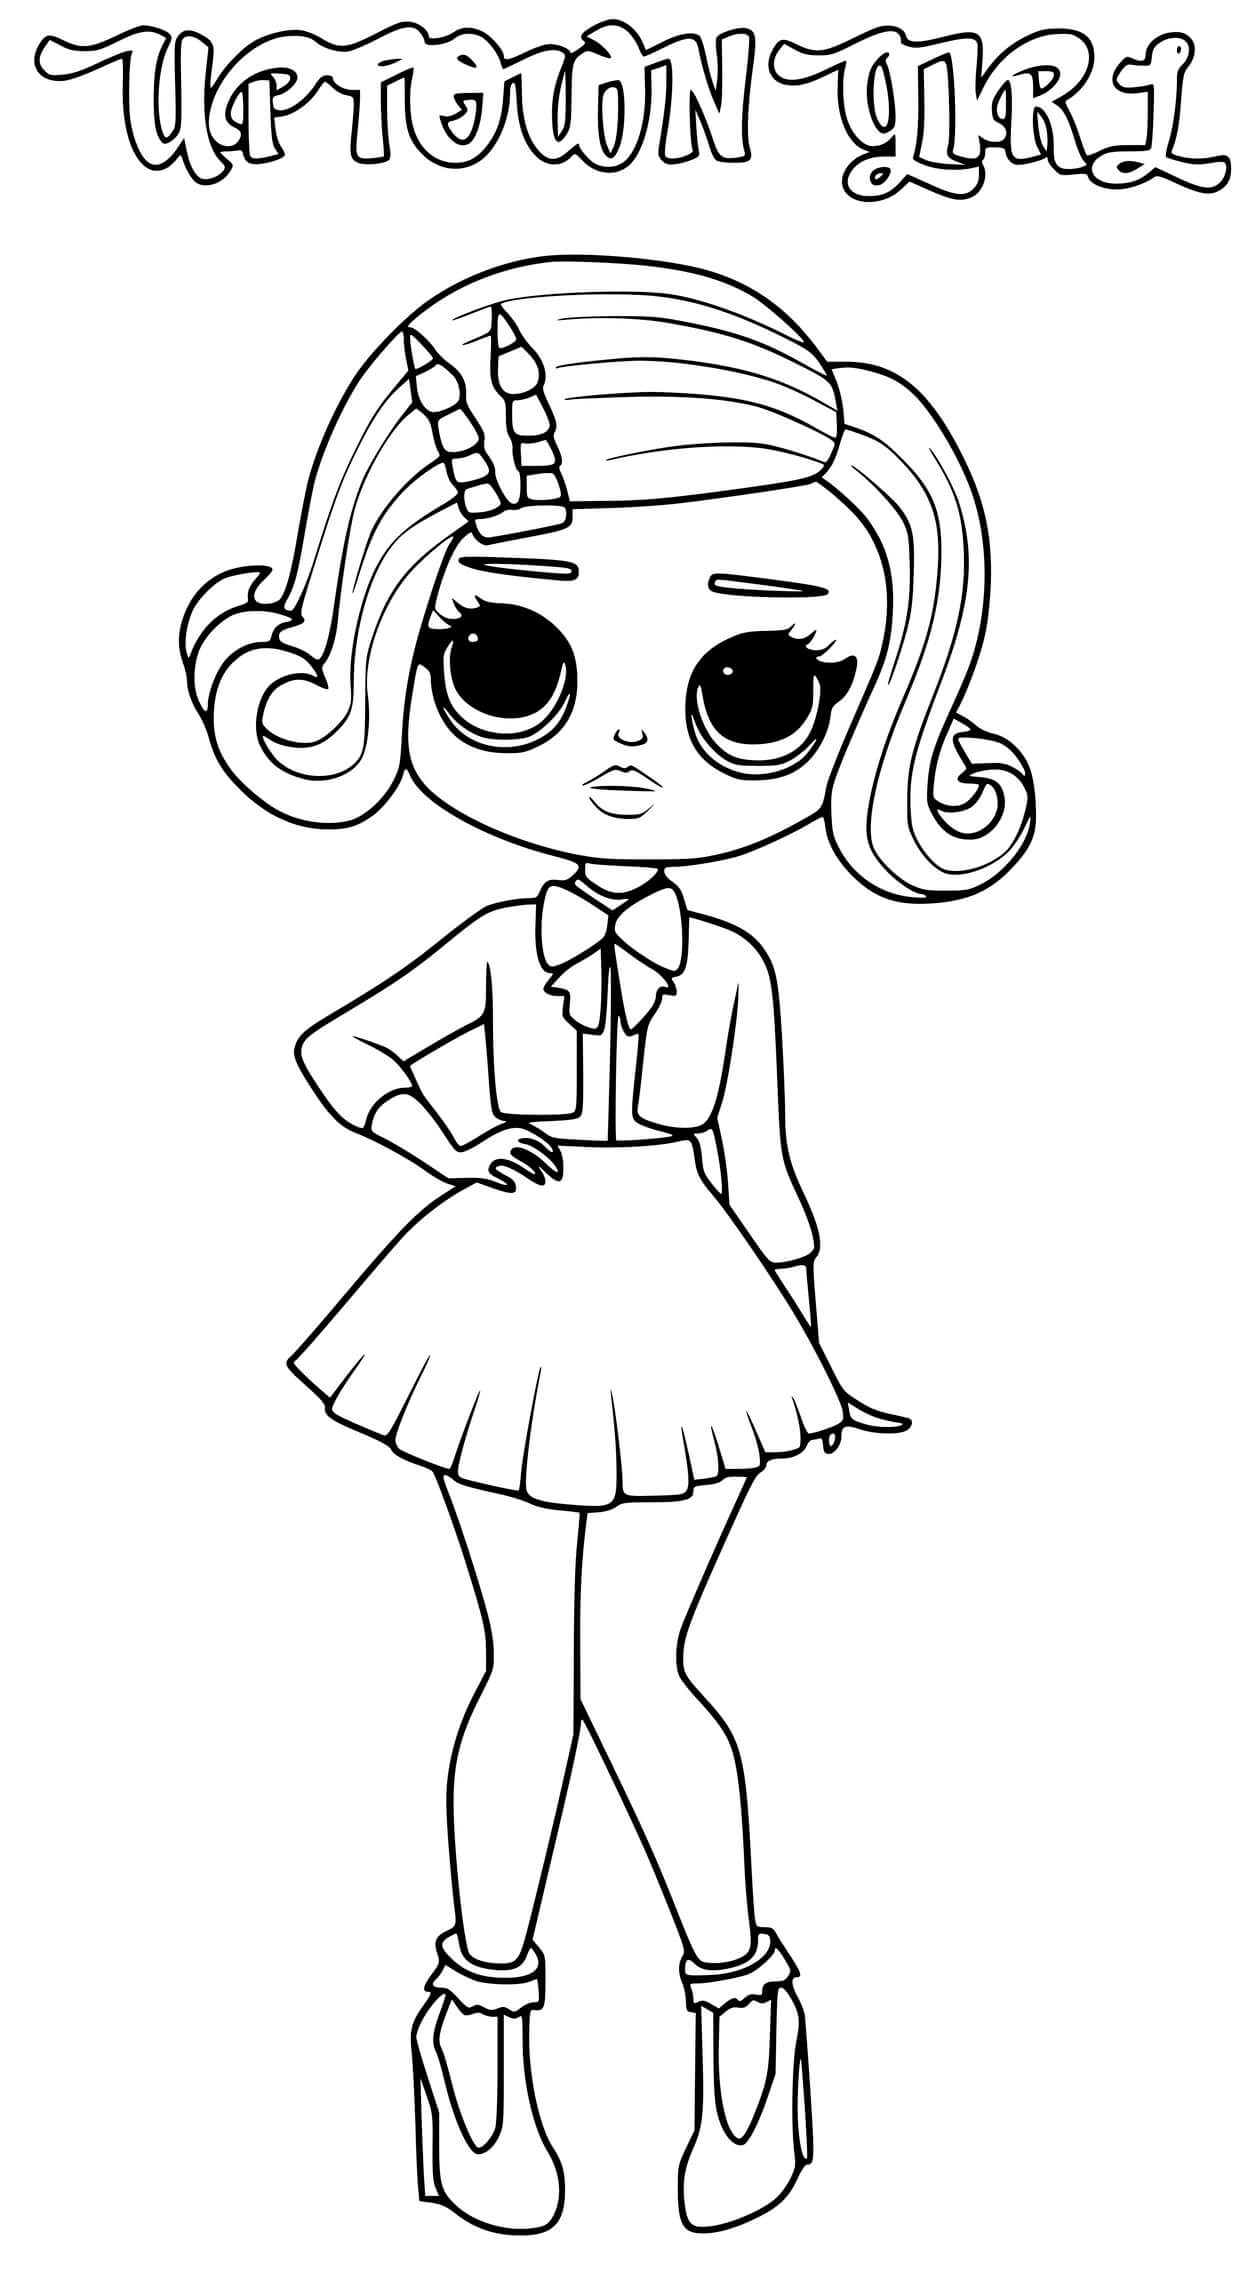 Uptown Girl Lol Omg Coloring Page